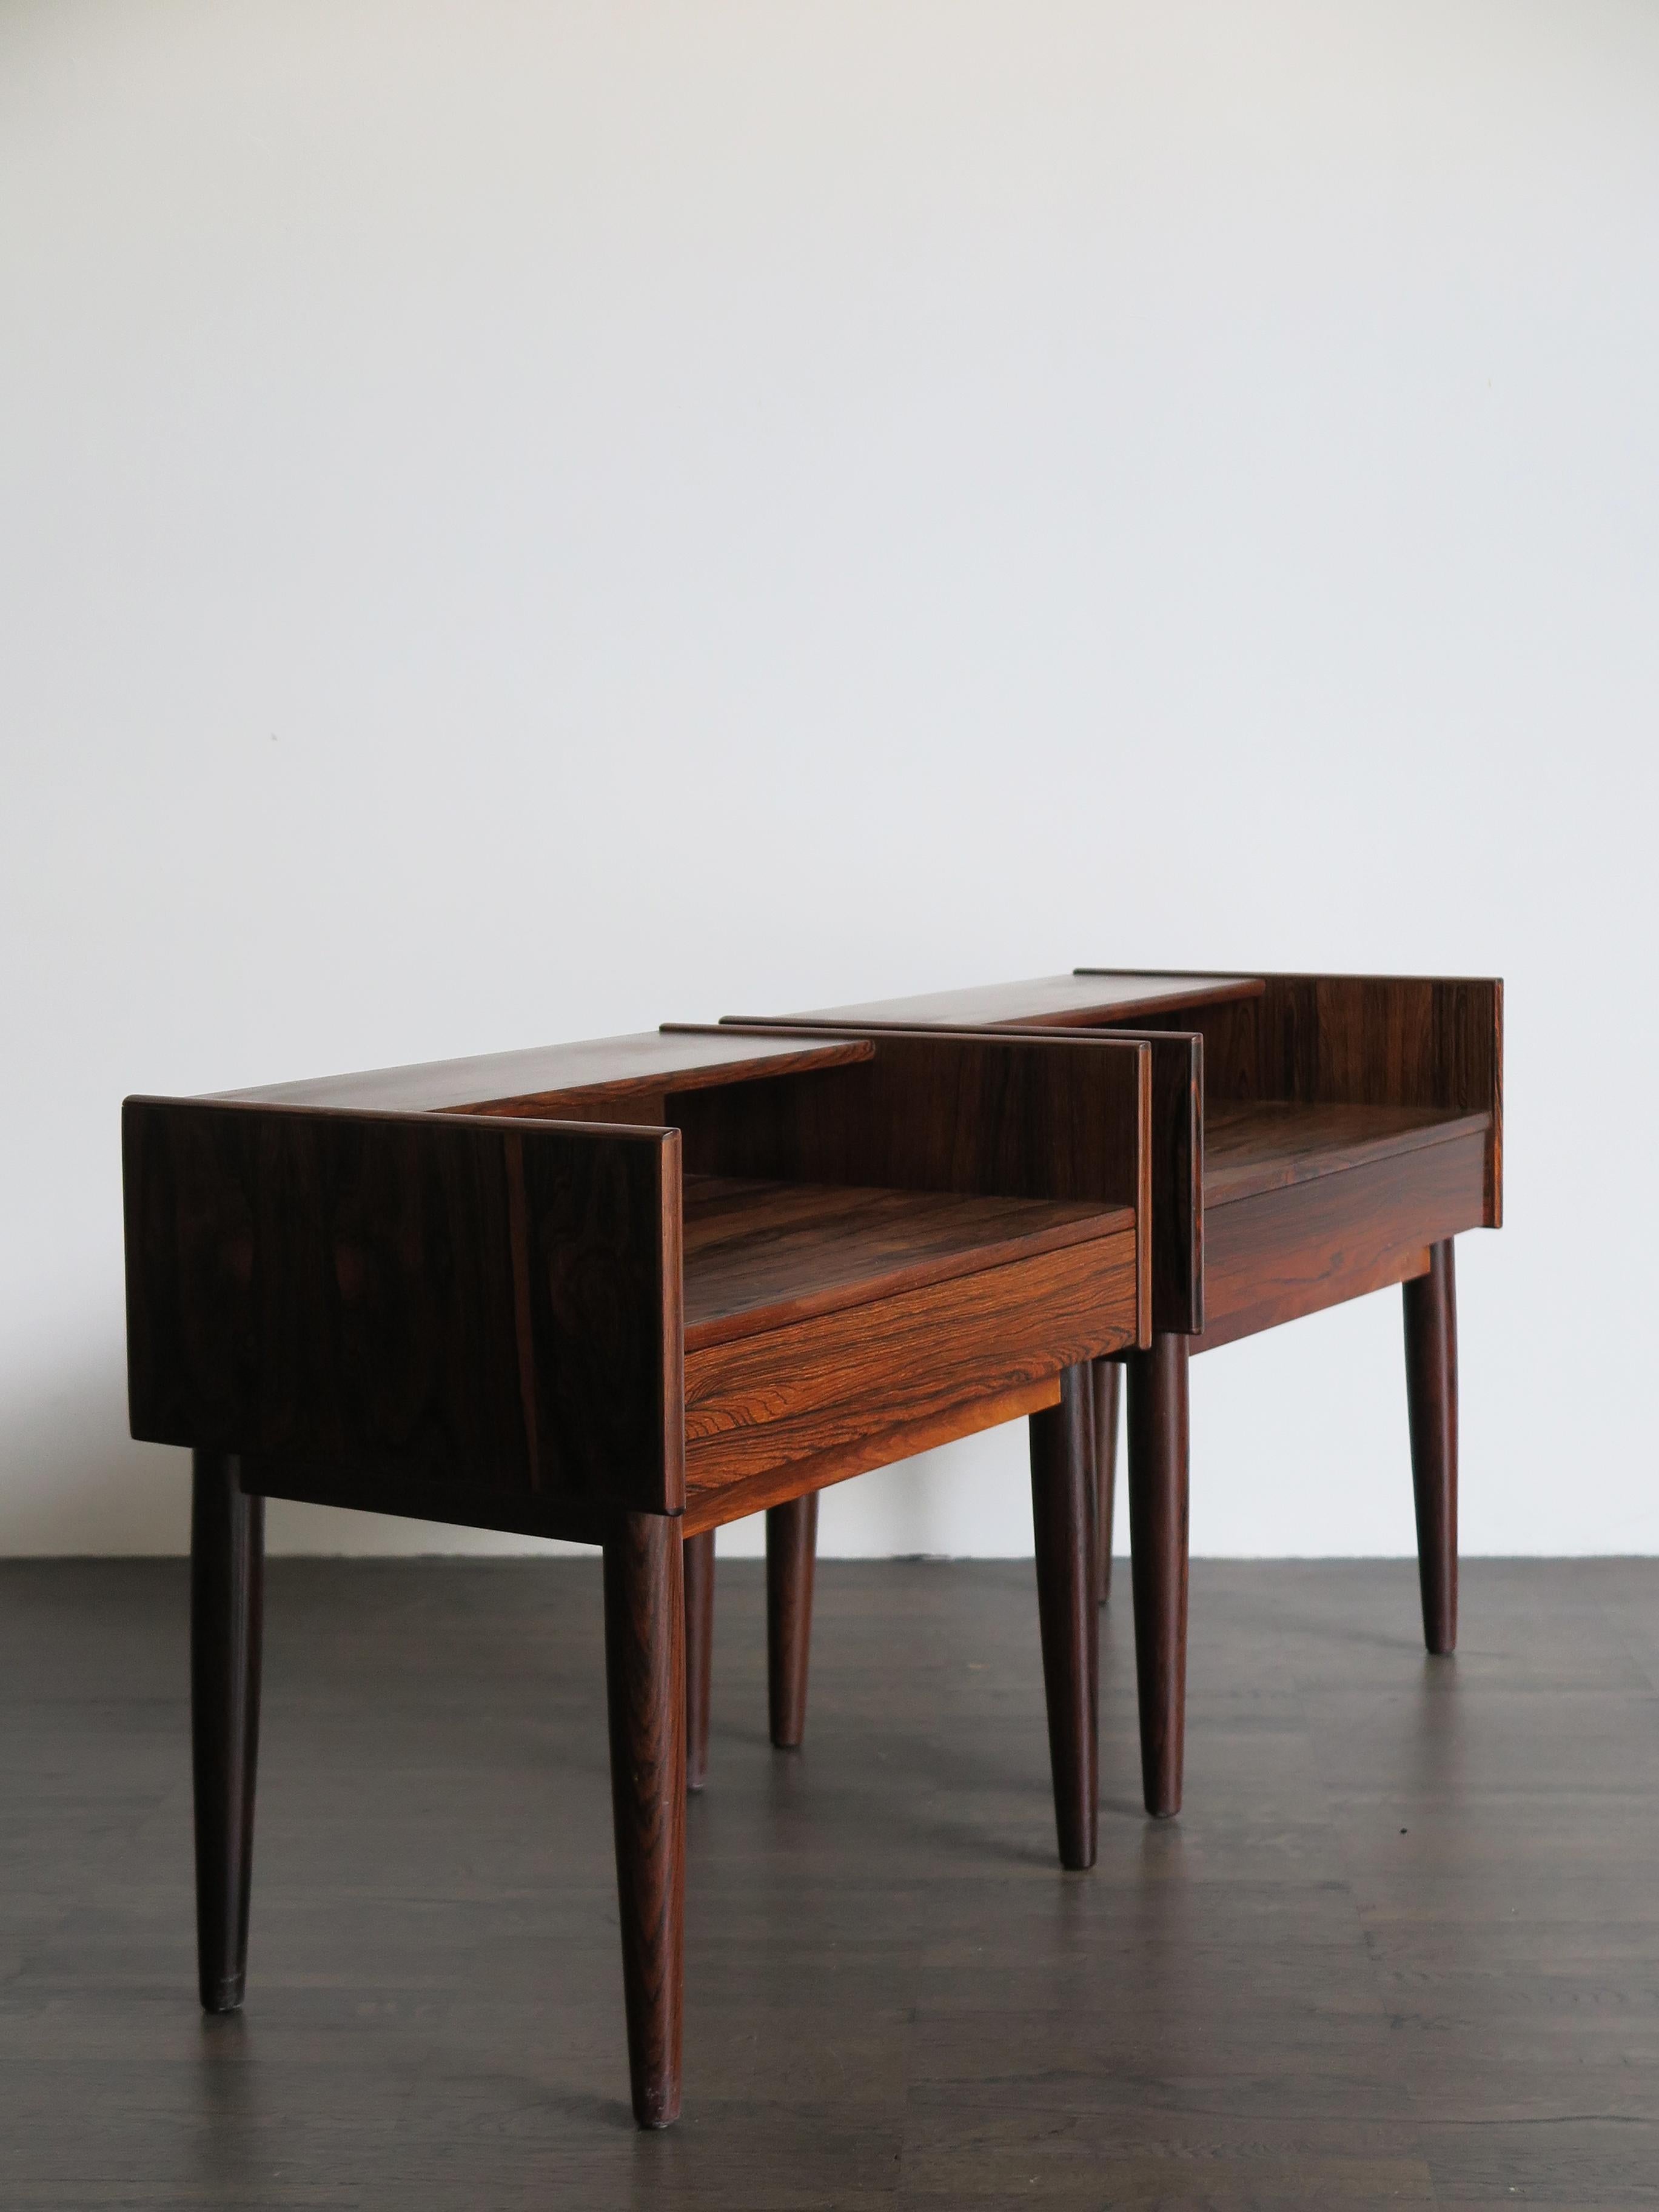 Scandinavian Mid-Century Modern design rosewood bedside tables set designed by Melvin Mikkelsen for Haslev Møbler Pandrup with two pull-out drawers, Denmark 1960s

Please note that the items are original of the period and this shows normal signs